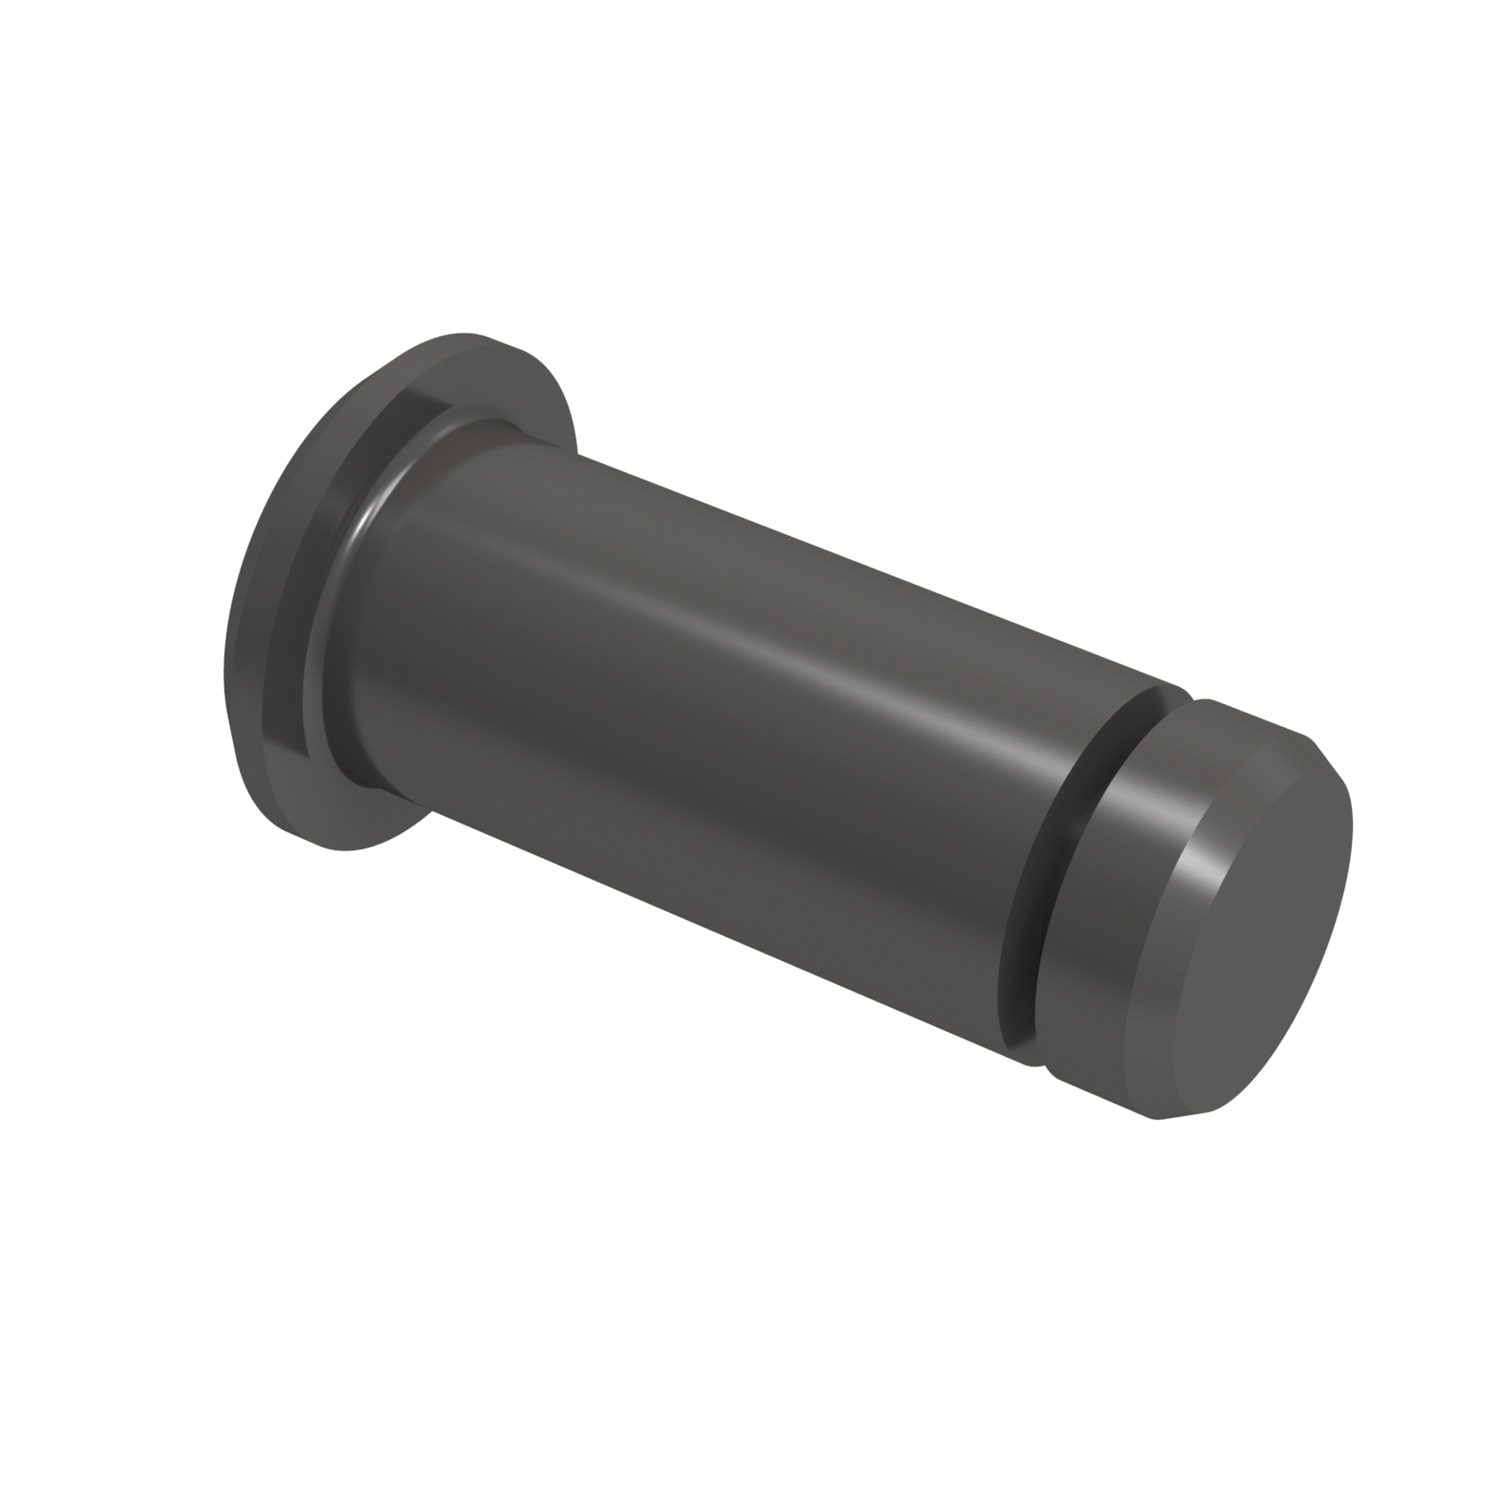 R3453 - Plastic Clevis Pin